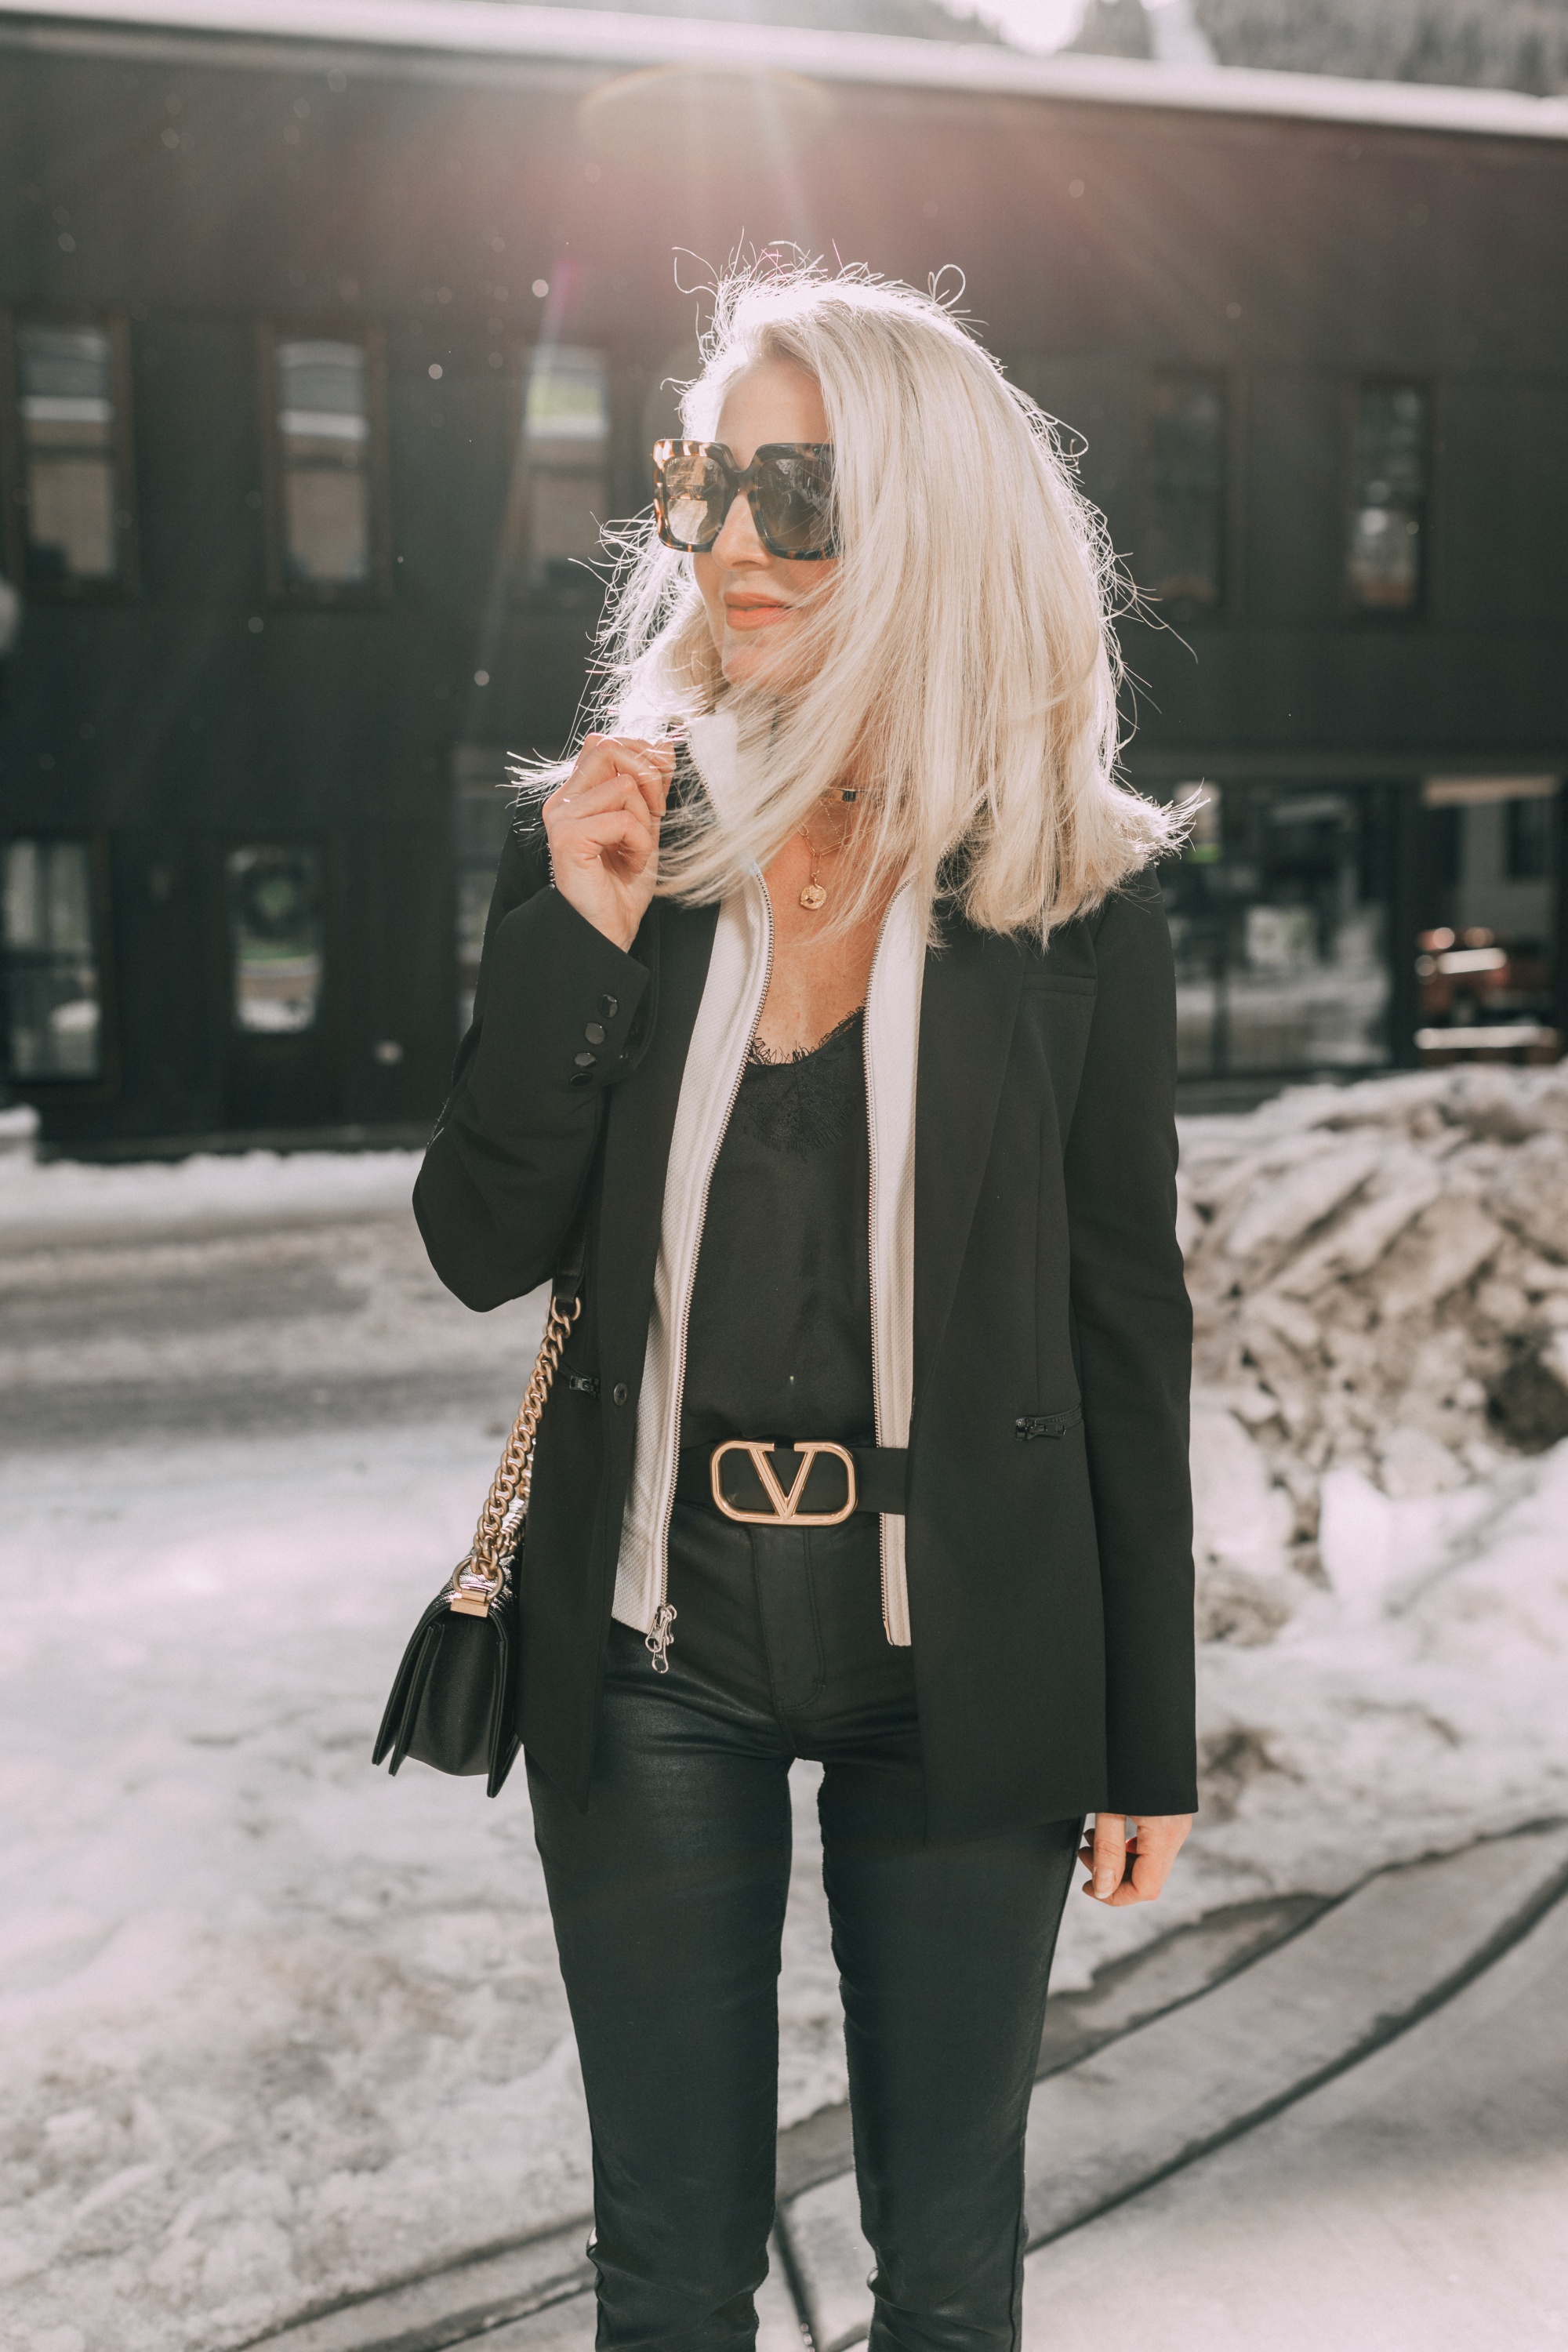 black Veronica Beard blazer date night outfit with ivory blazer dickey, black lace cami, gold valentino belt black jeans look for women over 40, Veronica